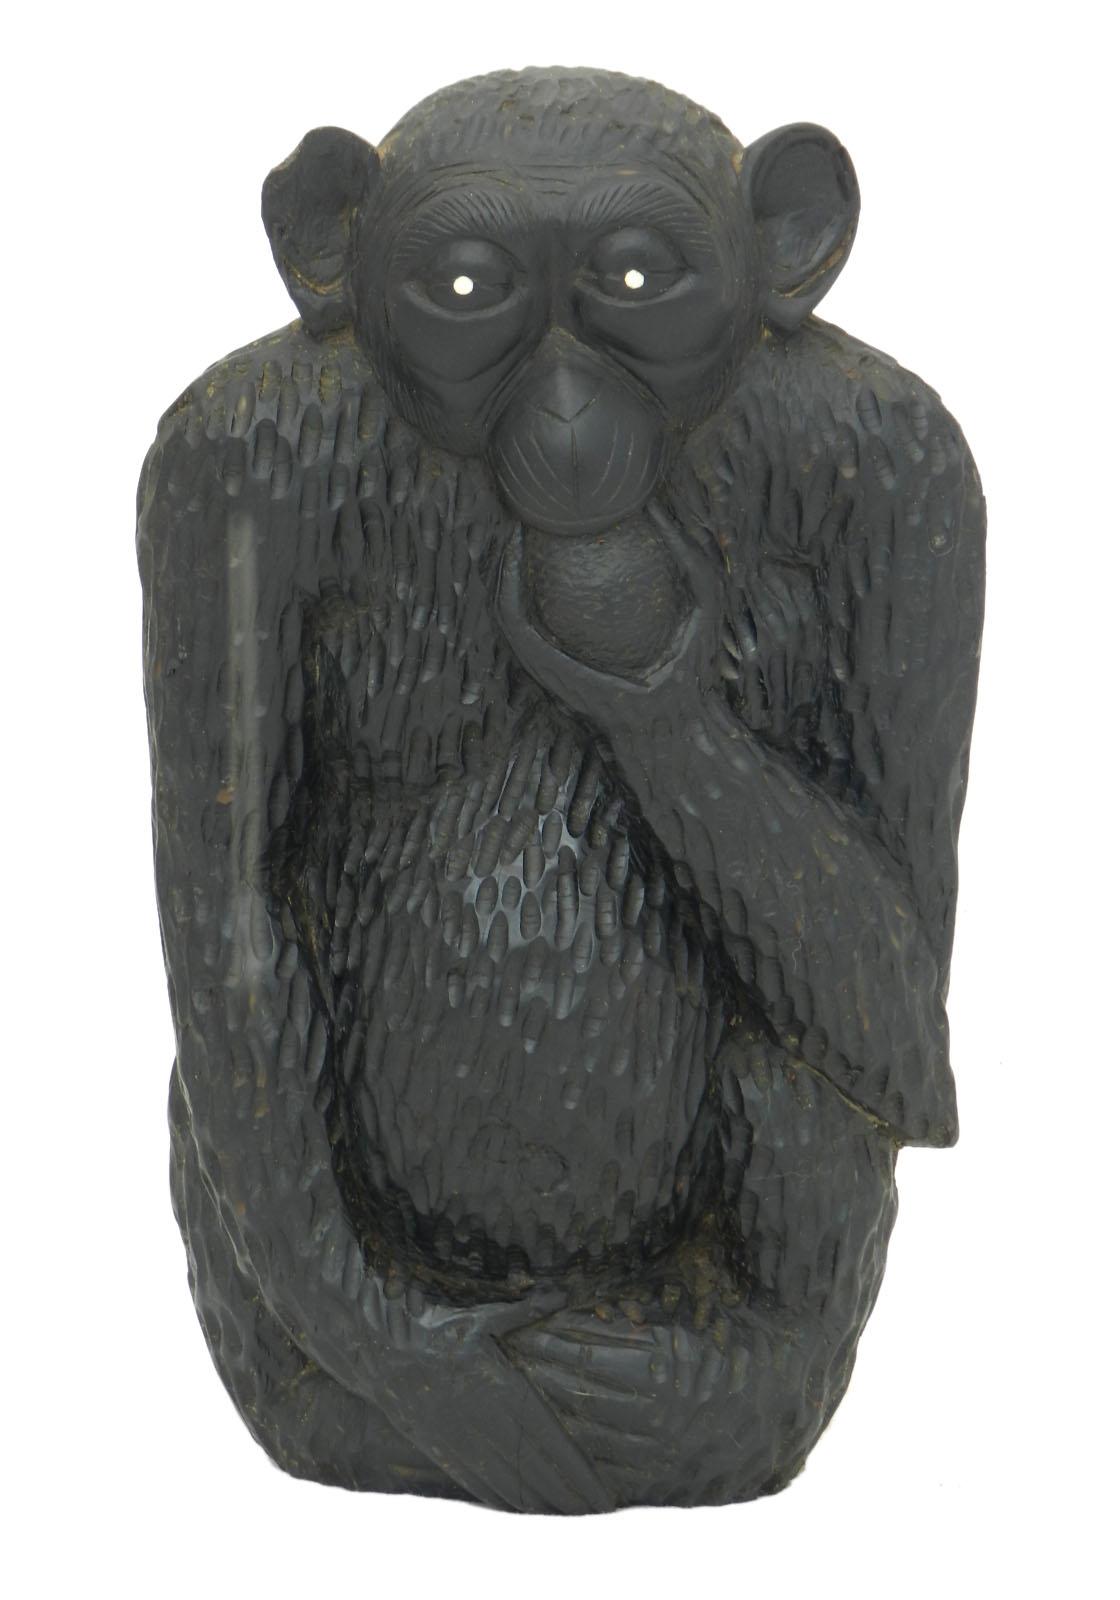 Monkey Sculpture Early 20th Century African Hand Carved Wood One of a Kind 3